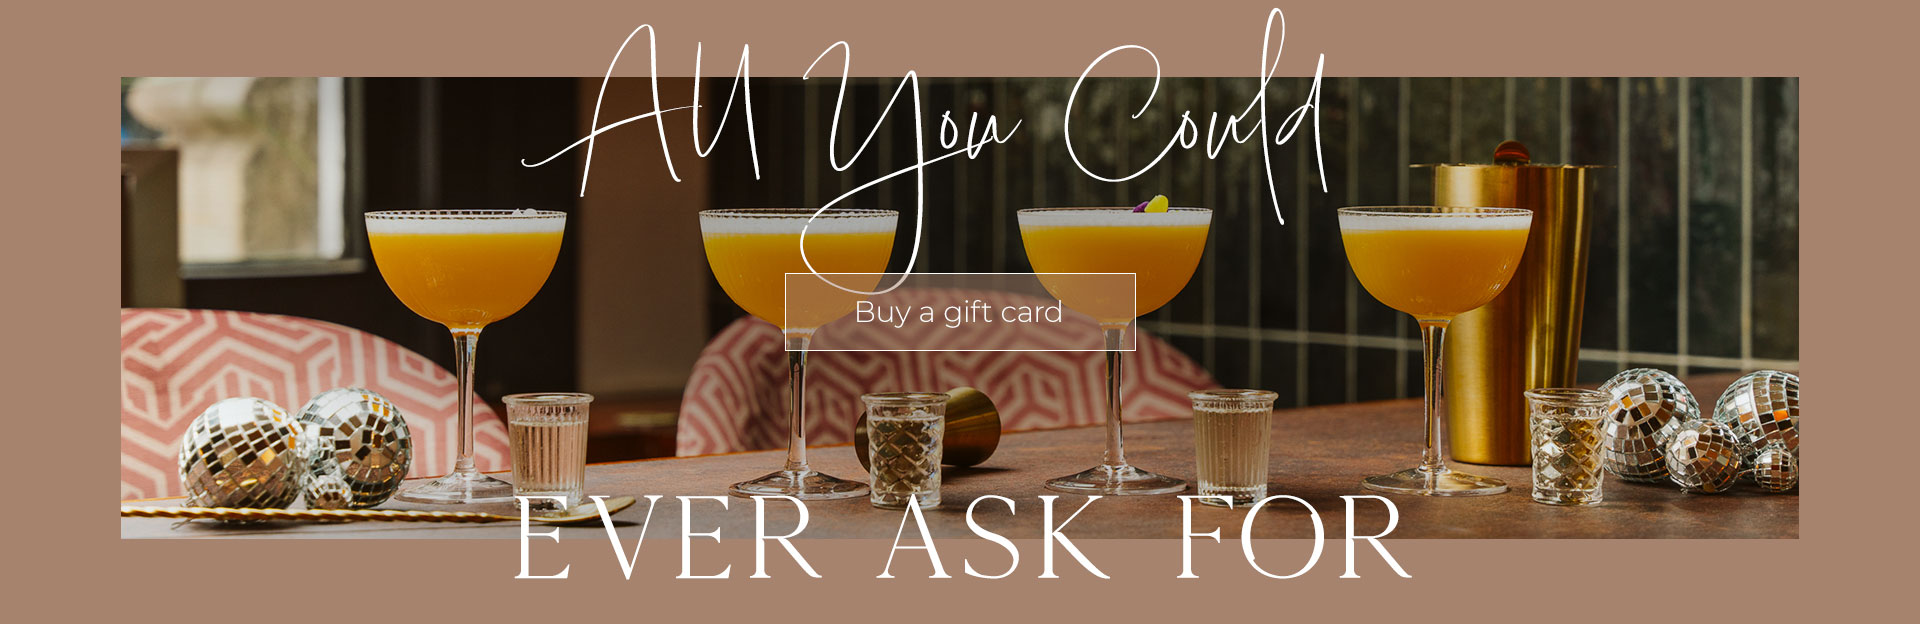 All Bar One Gift Cards at All Bar One Tower of London